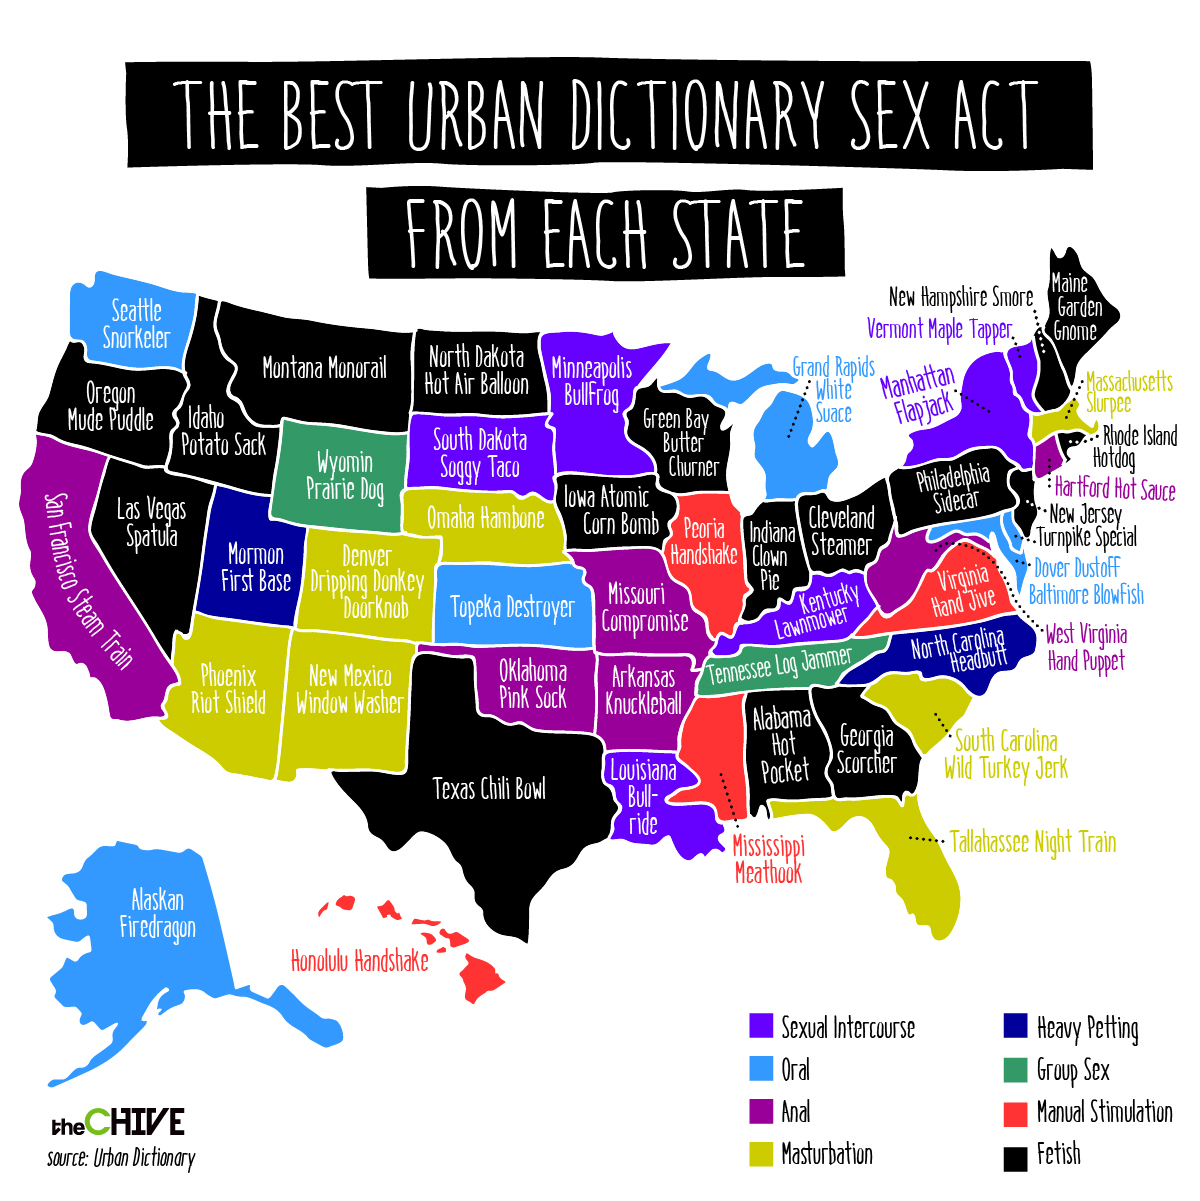 Heres The “Best” Urban Dictionary Sex Act From Each State 